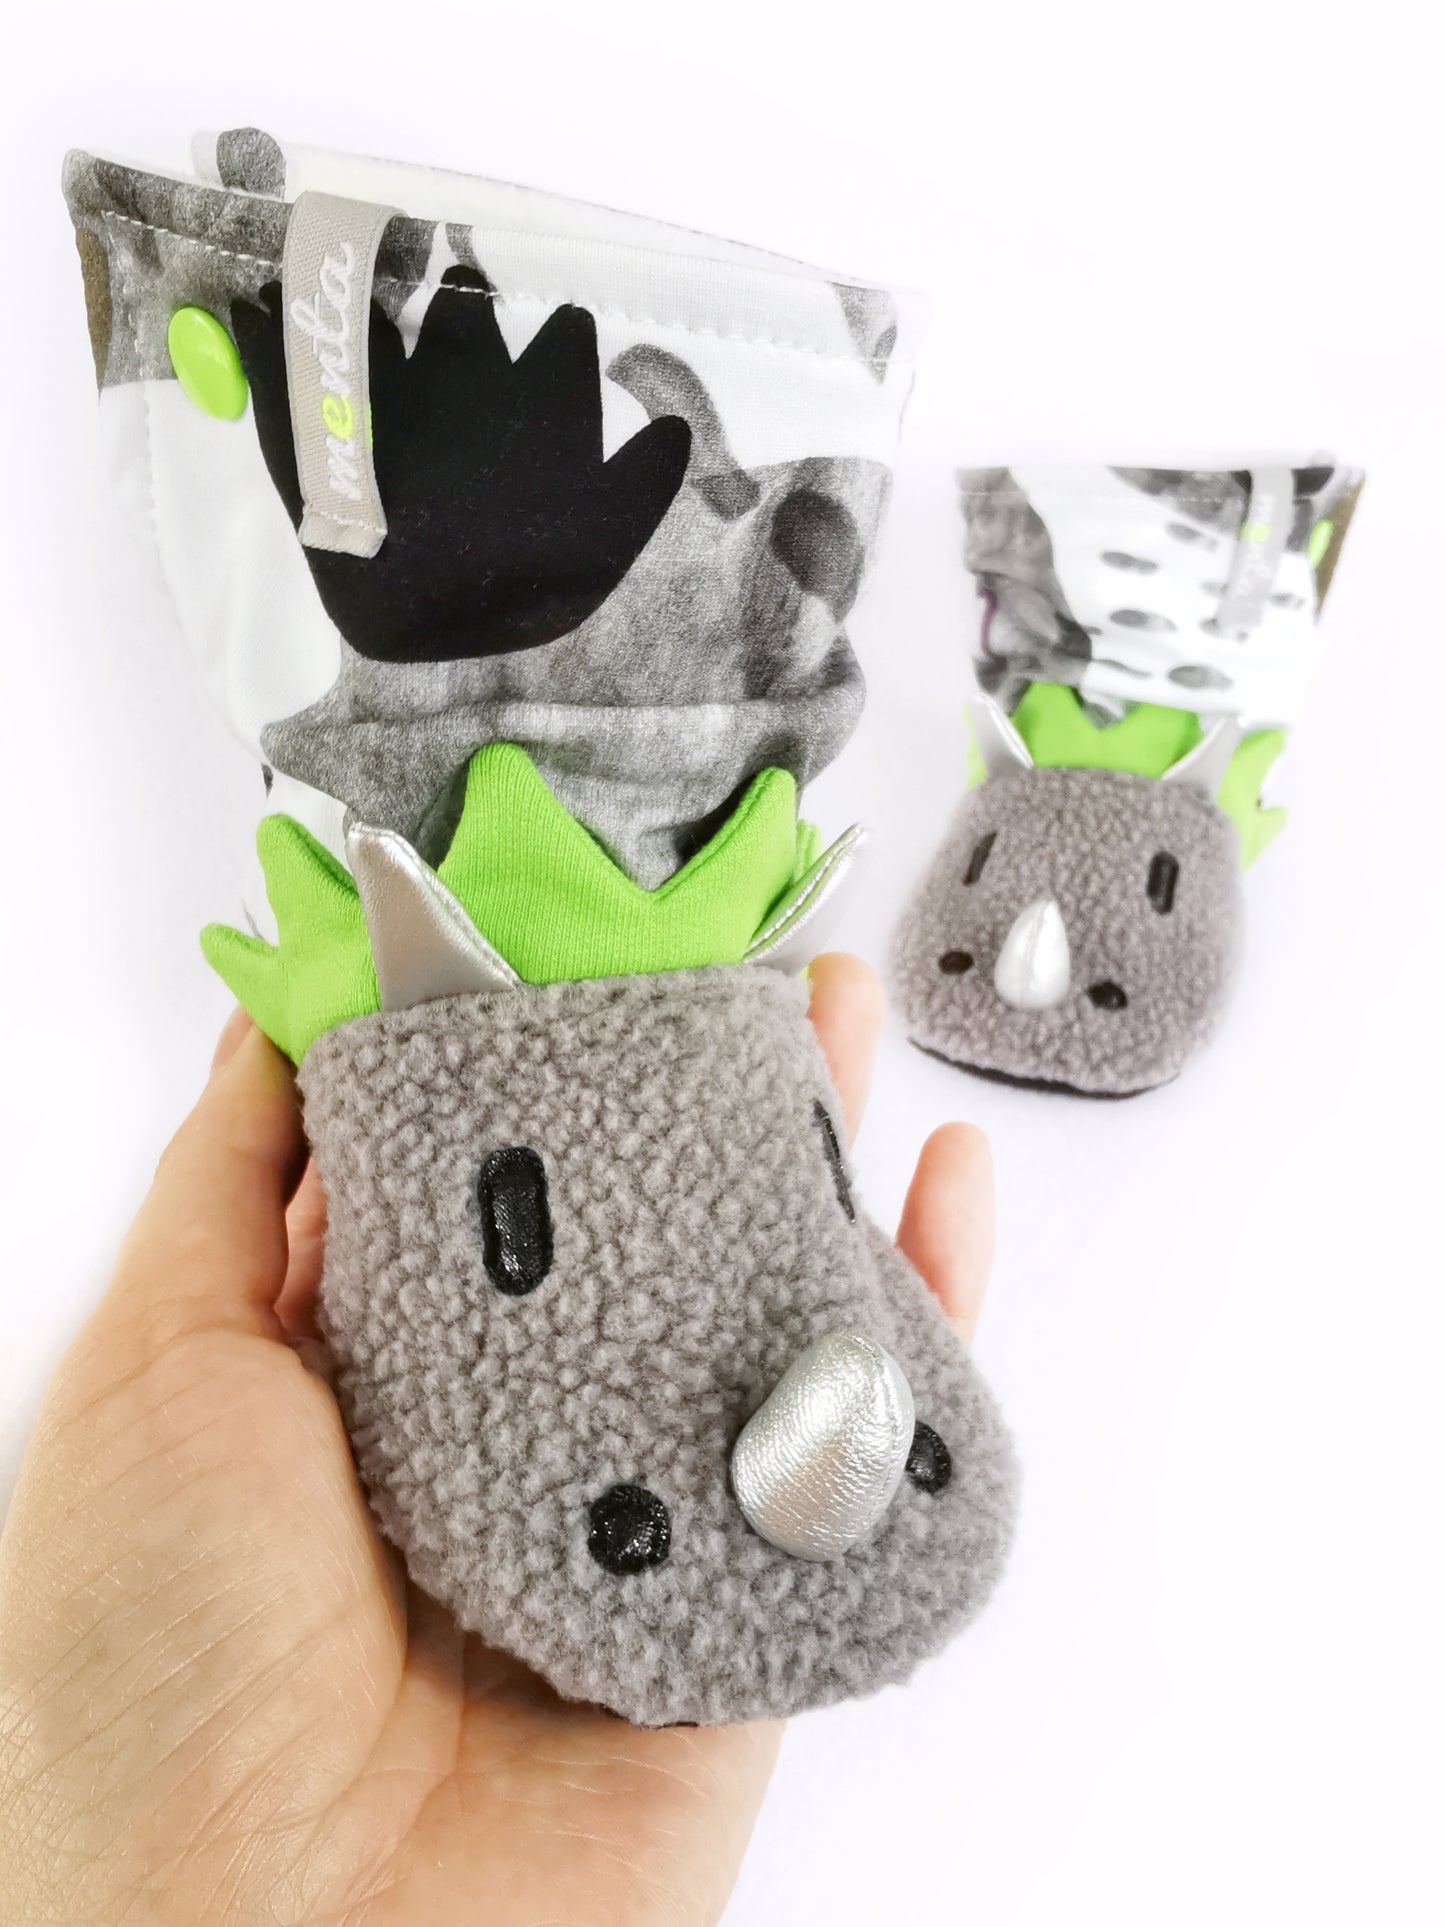 Baby Triceratops Add-on